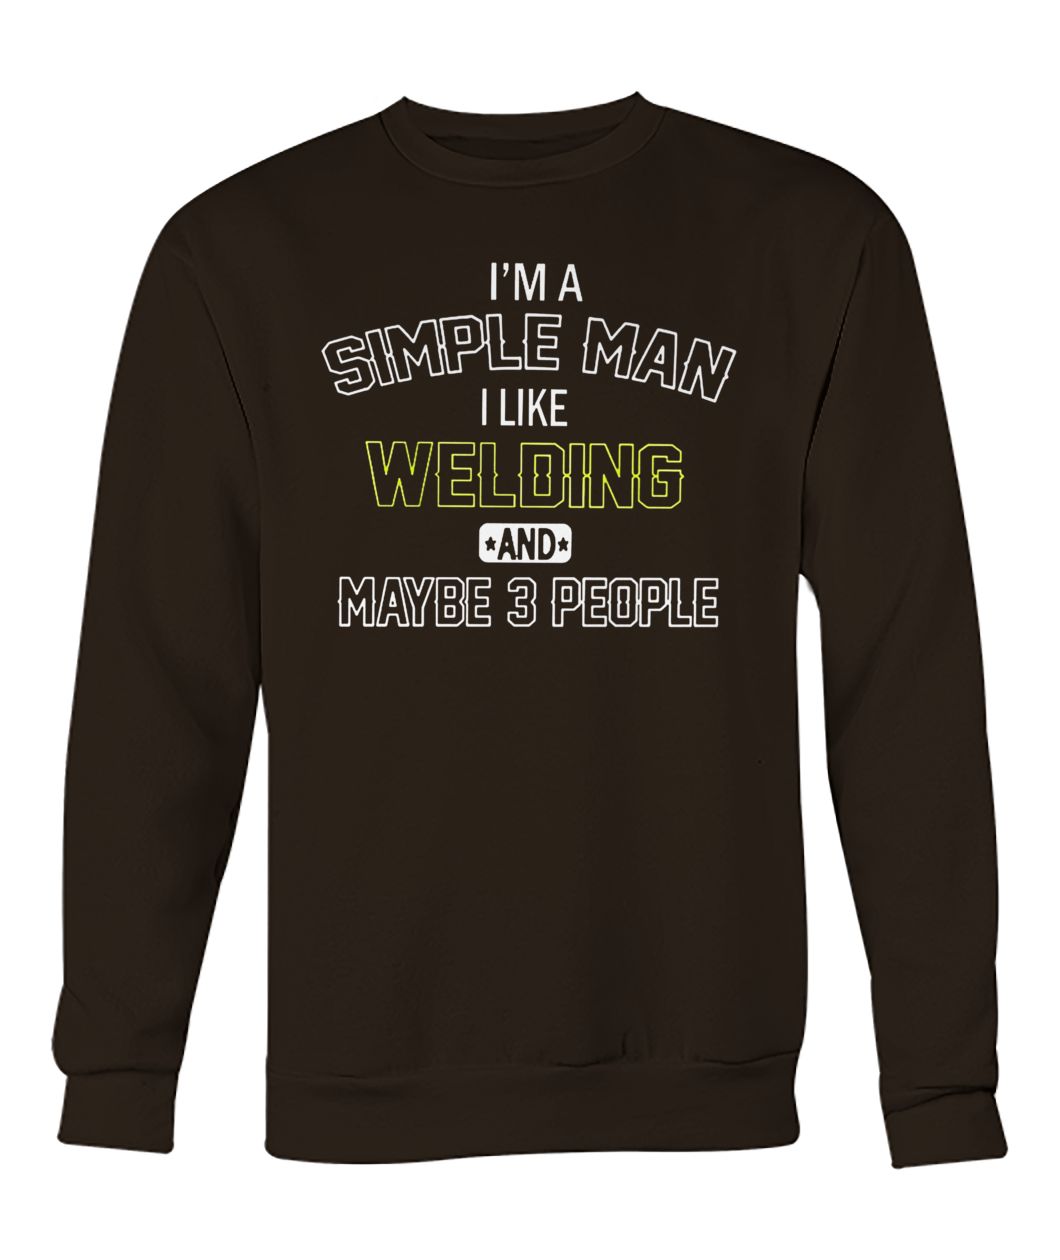 I'm a simple man I like welding and maybe 3 people crew neck sweatshirt